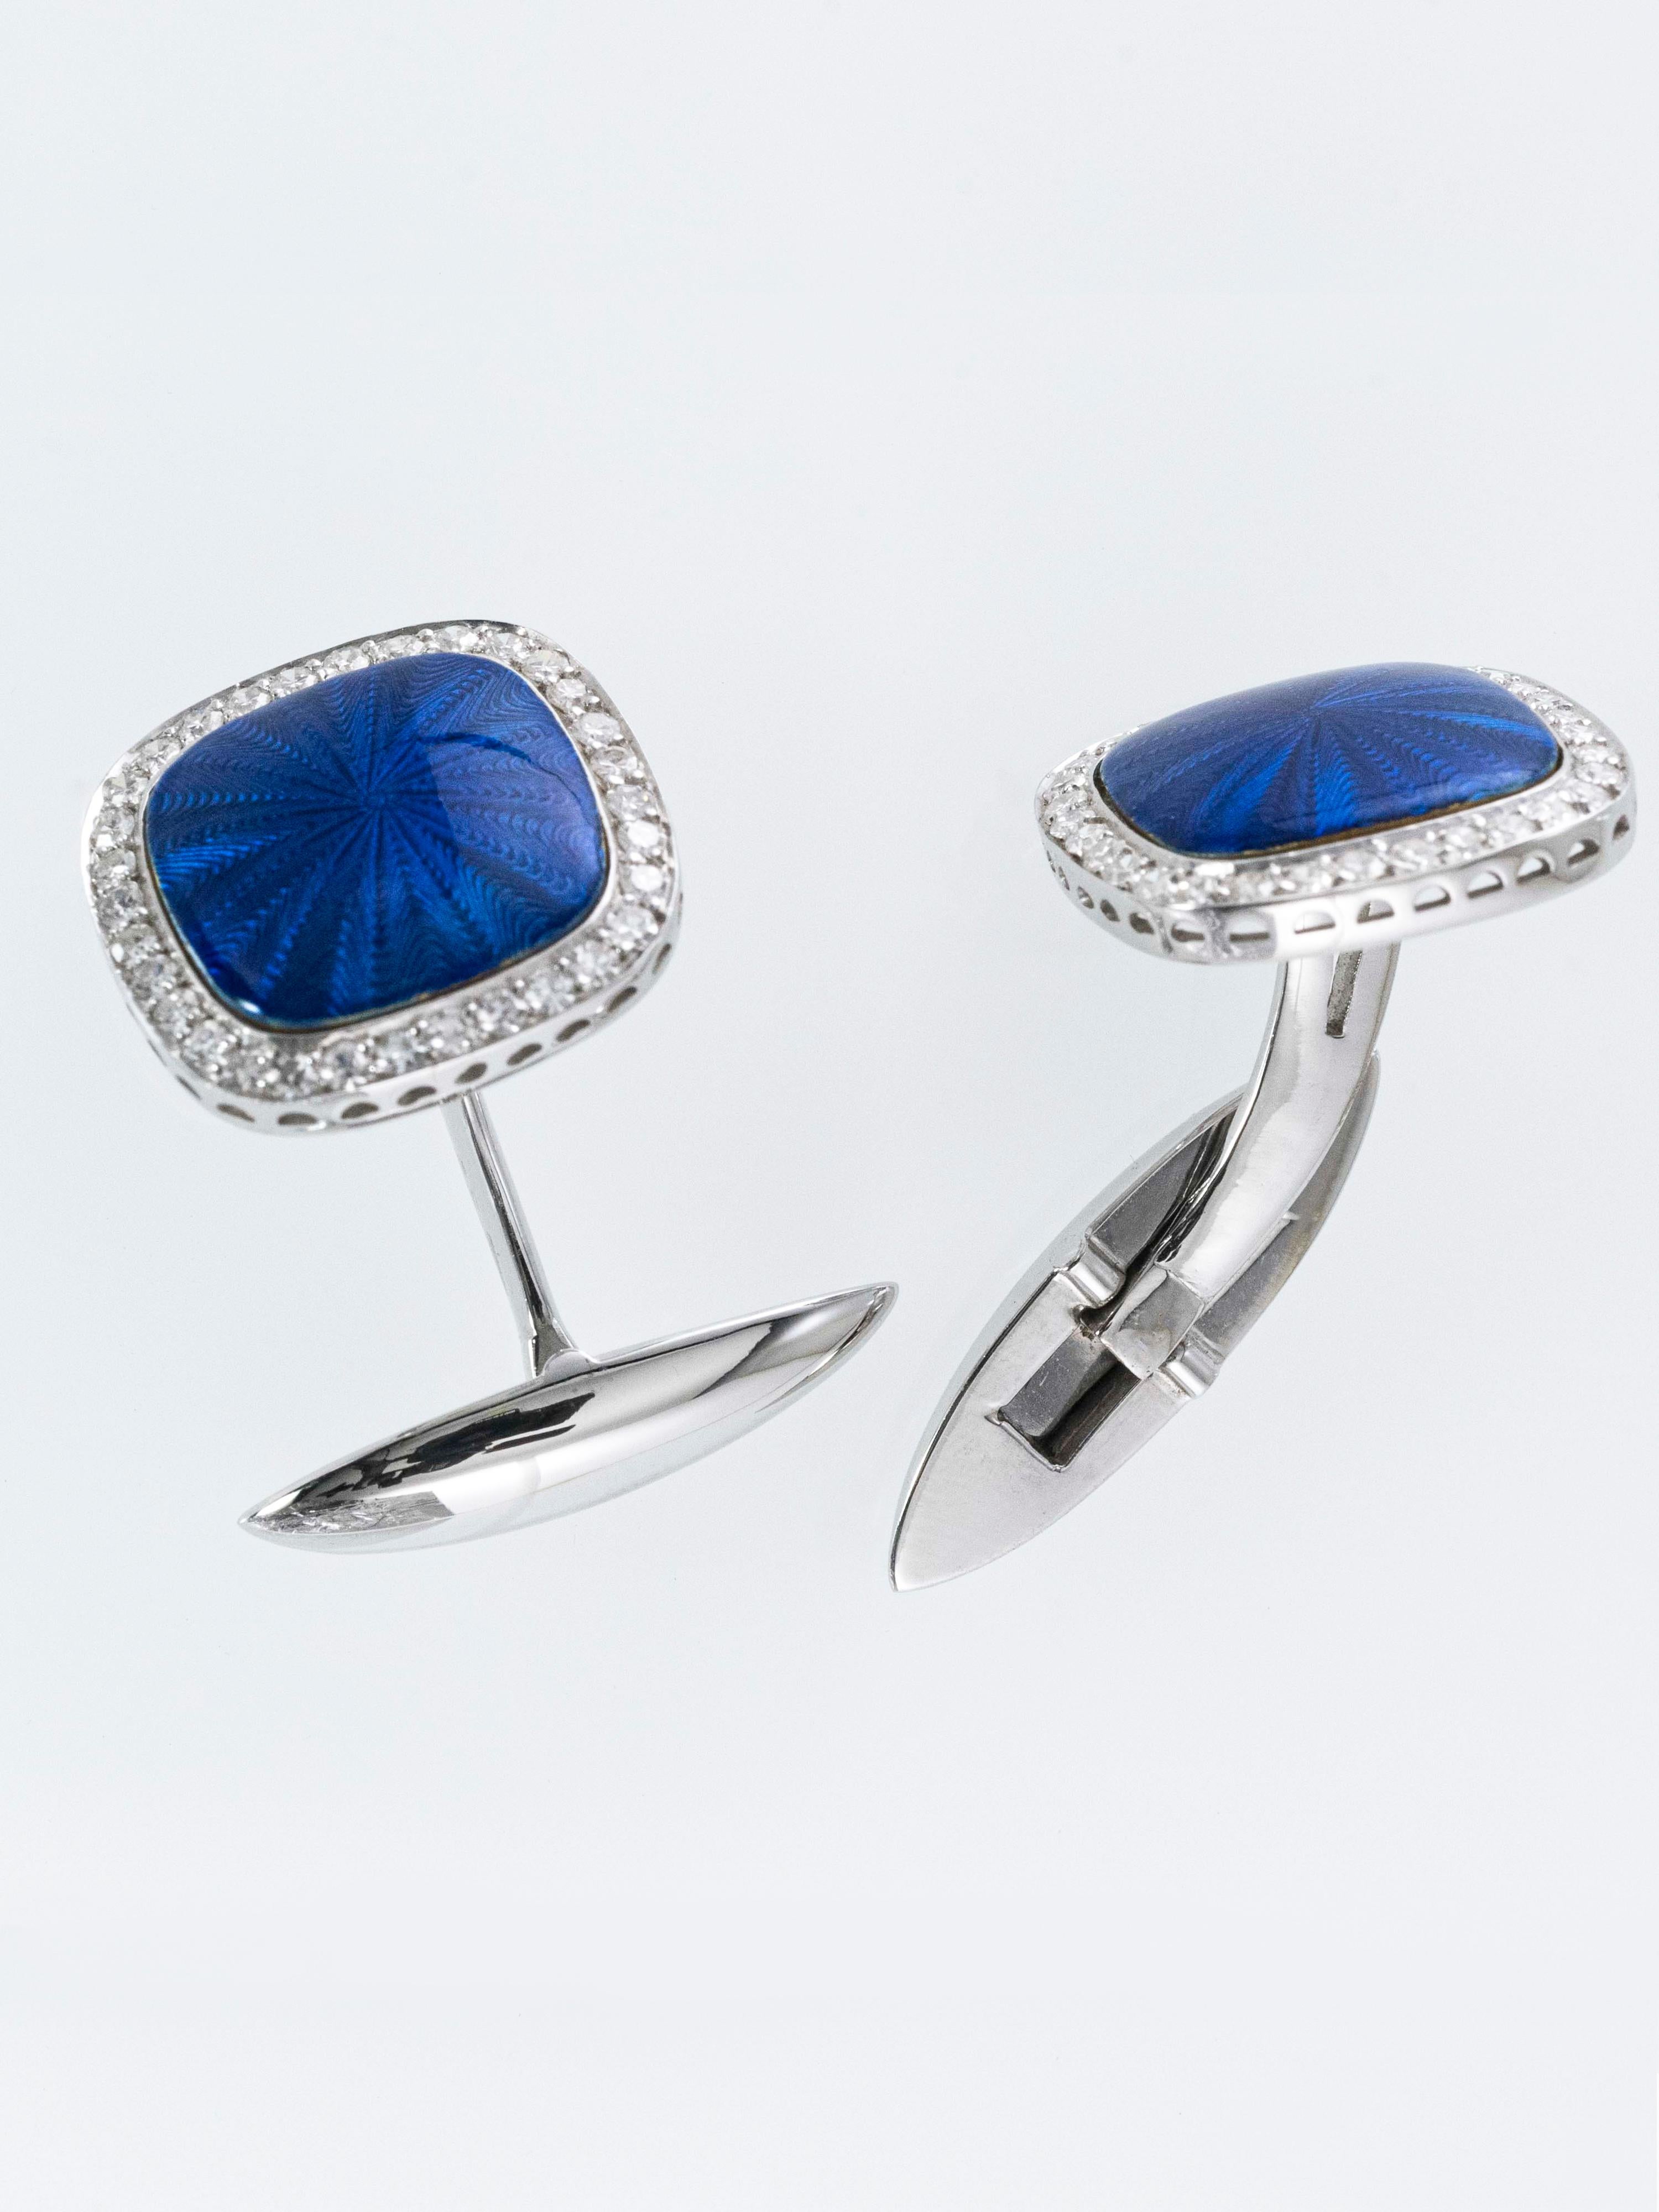 Very sophisticated cufflinks with a very high quality craftsmanship and embellished with Diamonds for ct 0.60.
The Cloisonnè enamel gives intensity and brightness to the blue and brings out the elegant Diamonds border.
Hand made in Italy.

Measures